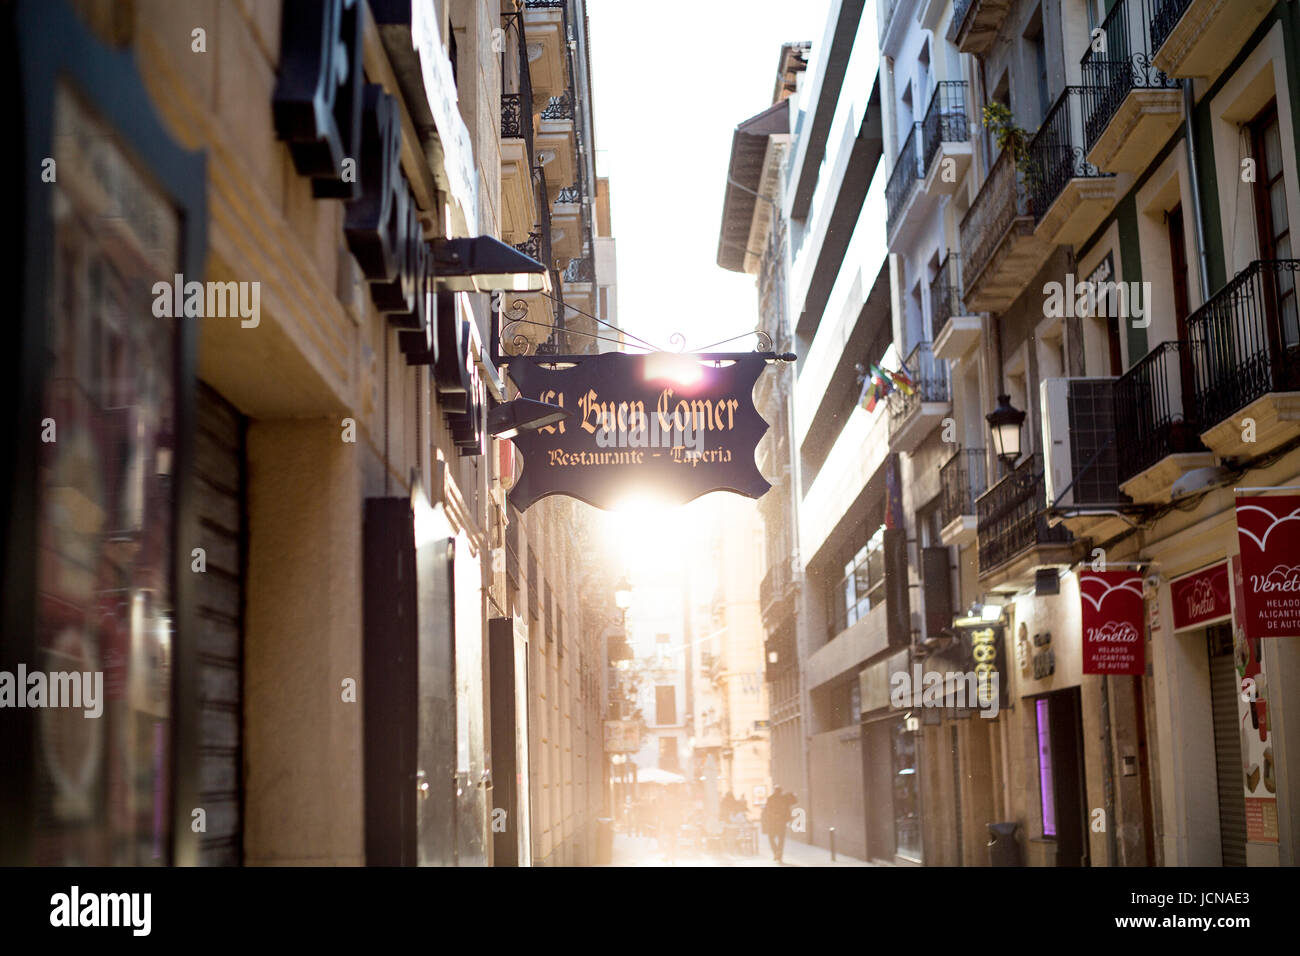 Sun behind sign in Alicante in Spain Stock Photo